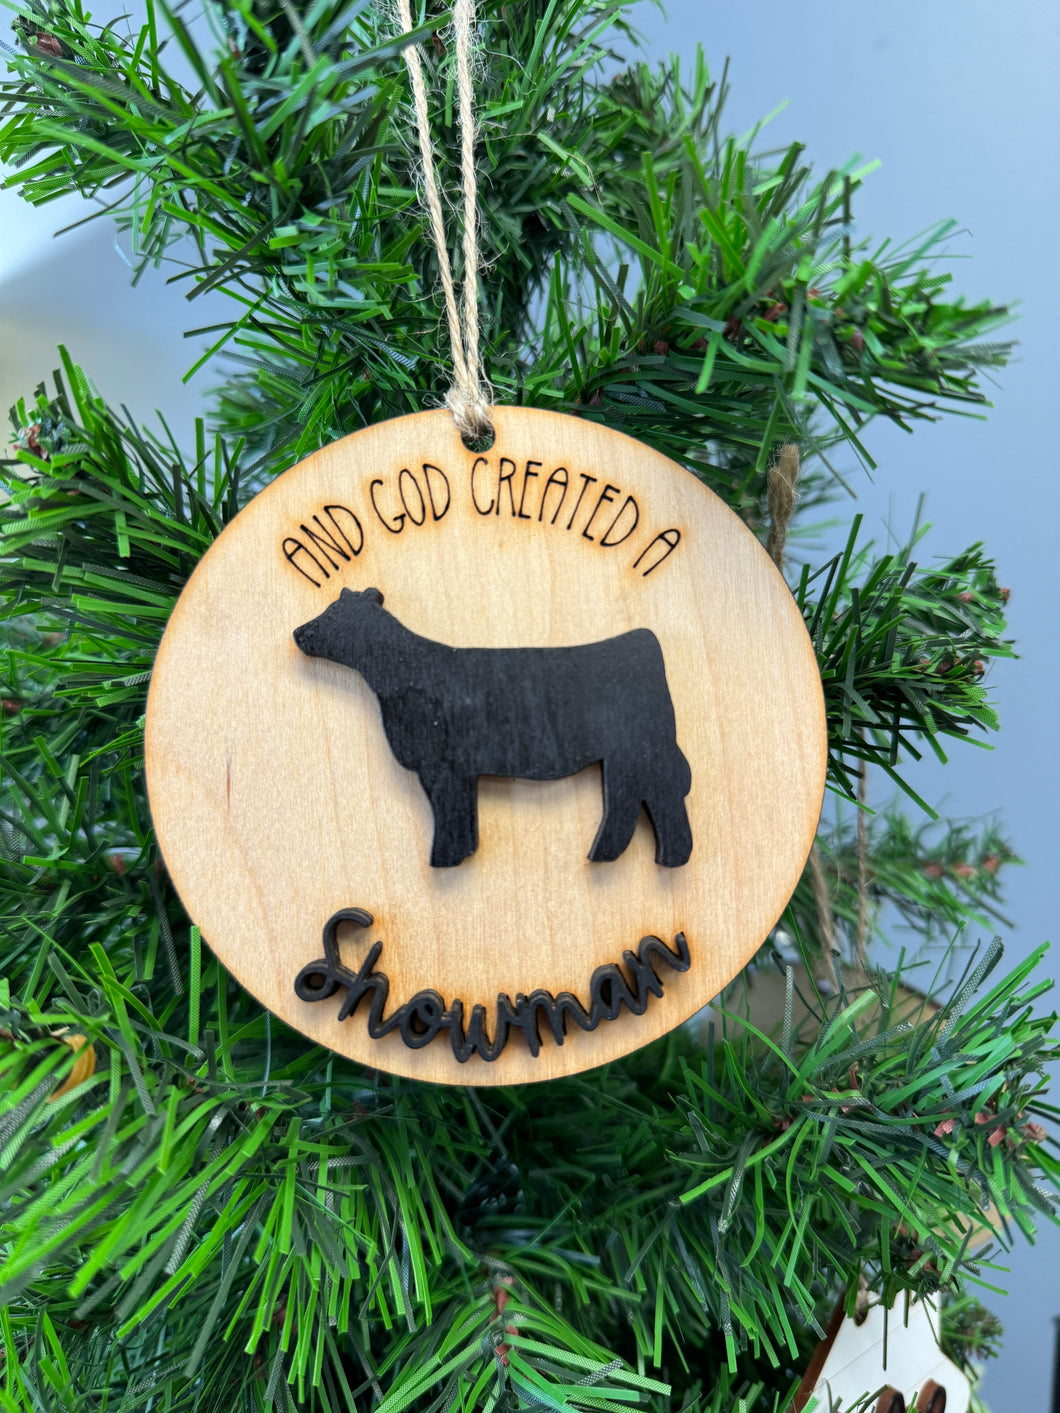 And God created a showman (steer) ornament